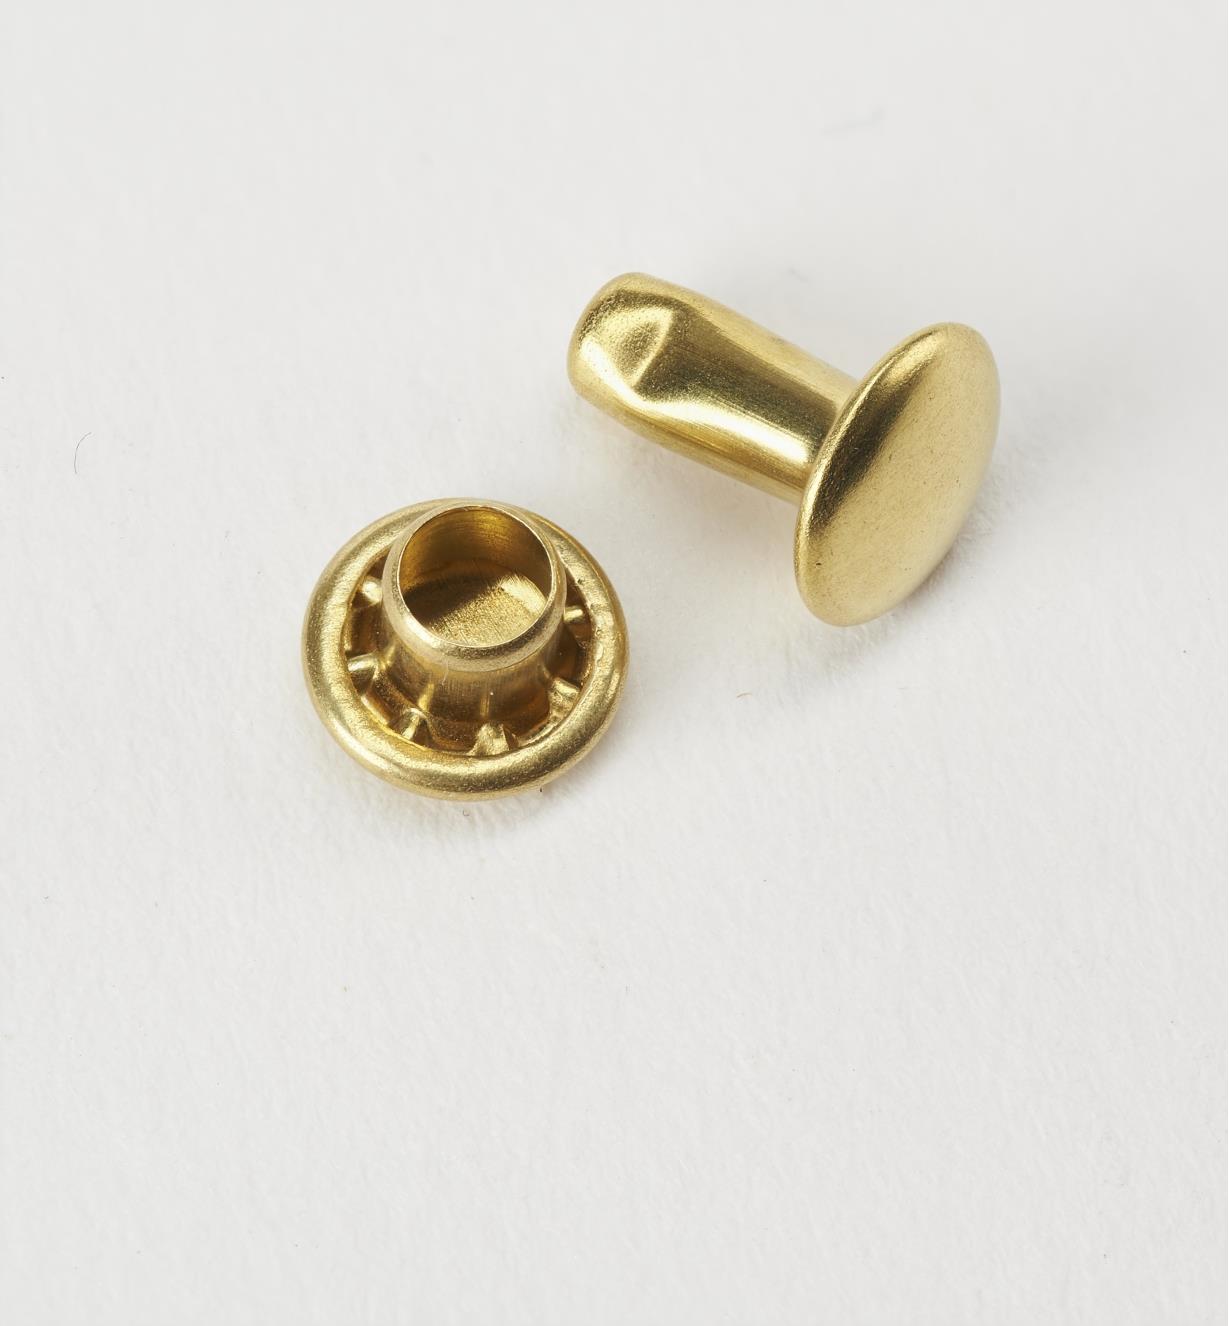 91Z5123 - ABC Morini Double-Capped Brass 7mm Small Rivets, pkg. of 25